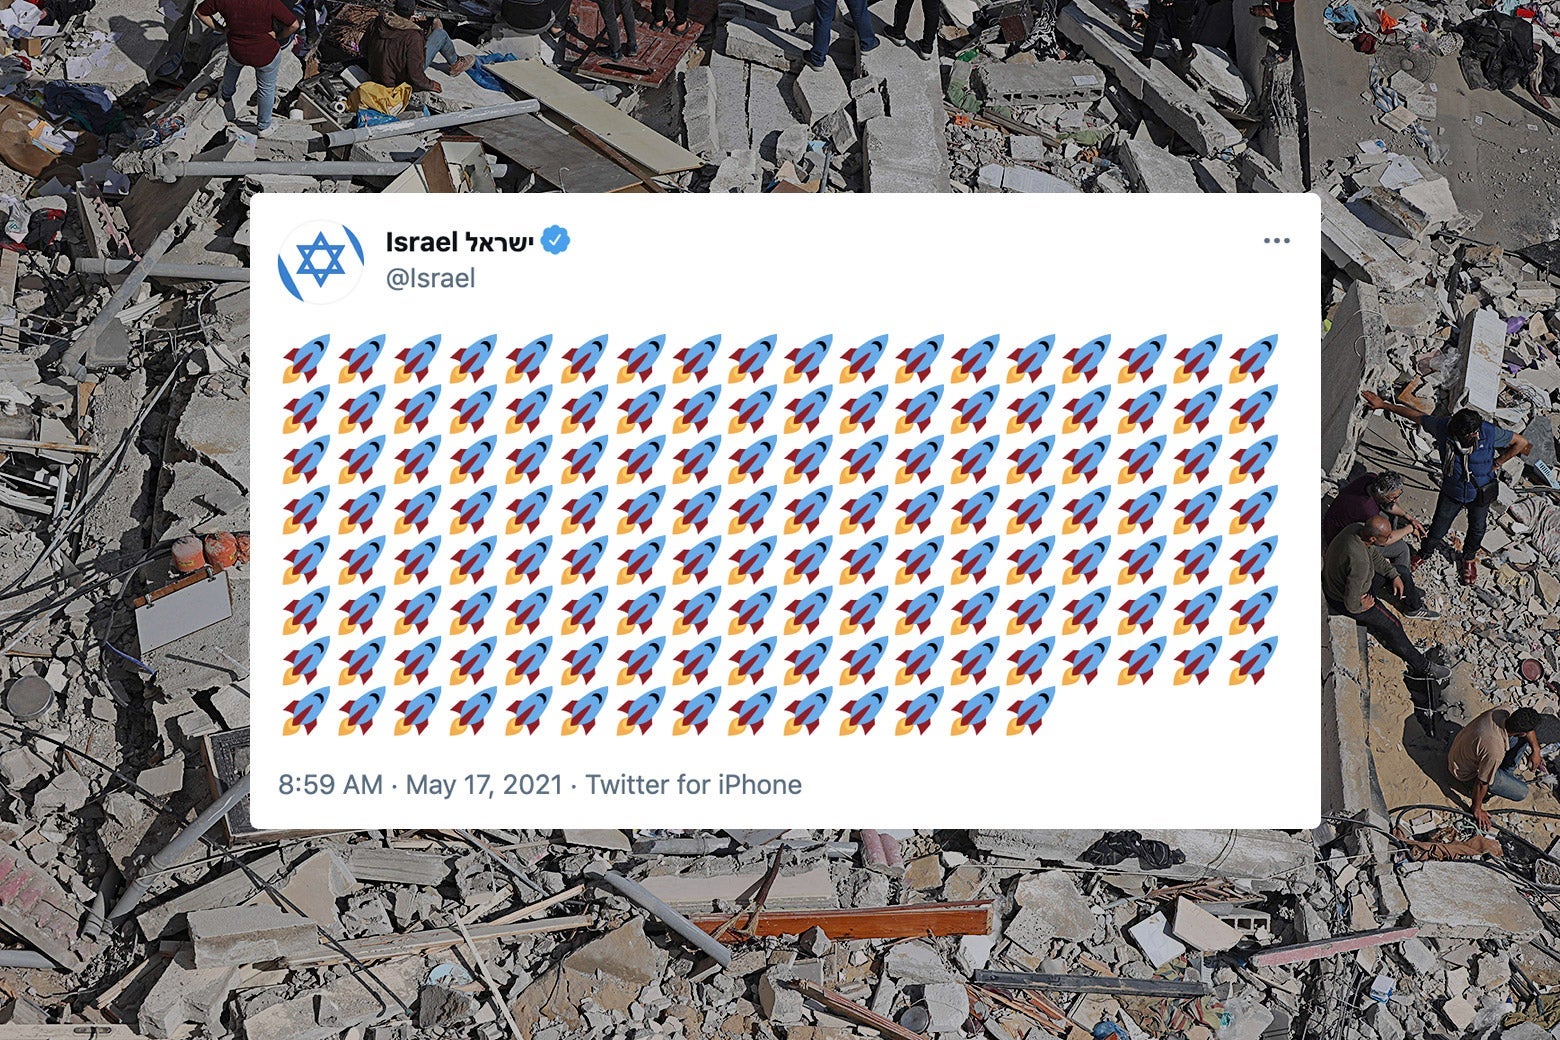 Destruction in Palestine from bombs shot by Israel and a tweet with several rocket emoji from Israel's official Twitter account